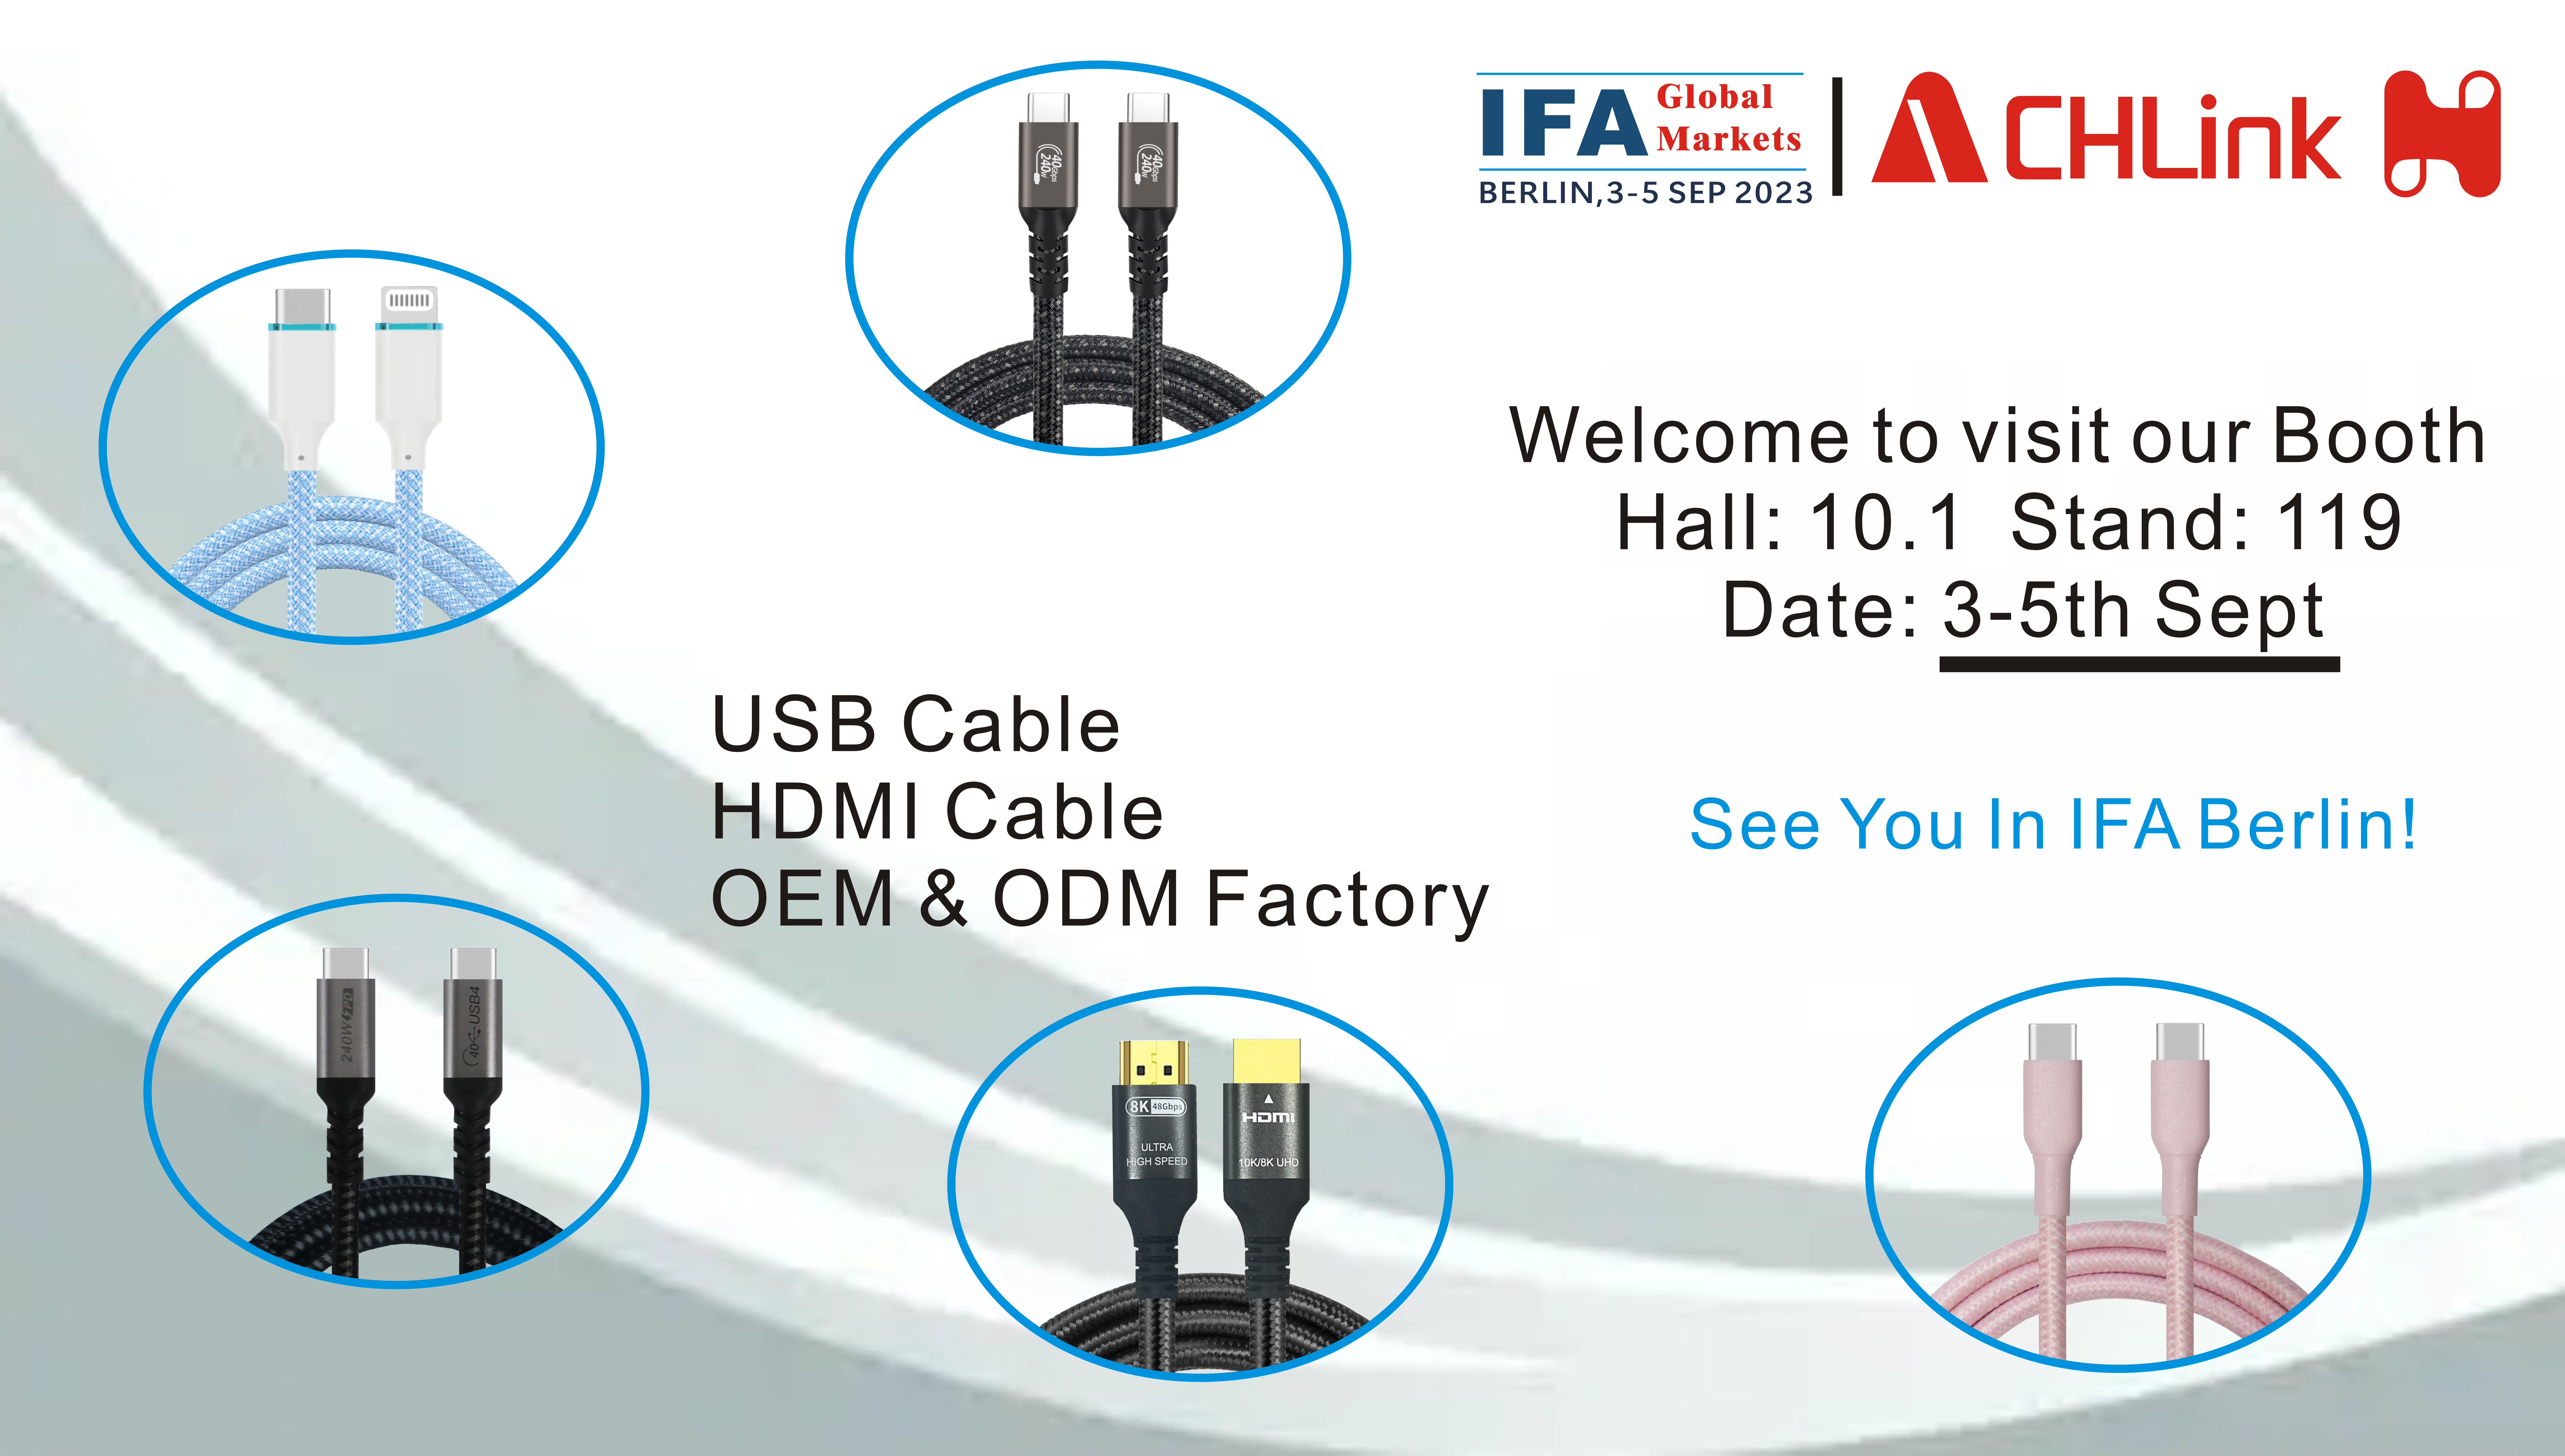 Welcome to visit our Booth Hall: 10.1  Stand: 119 Date: 3-5th Sept